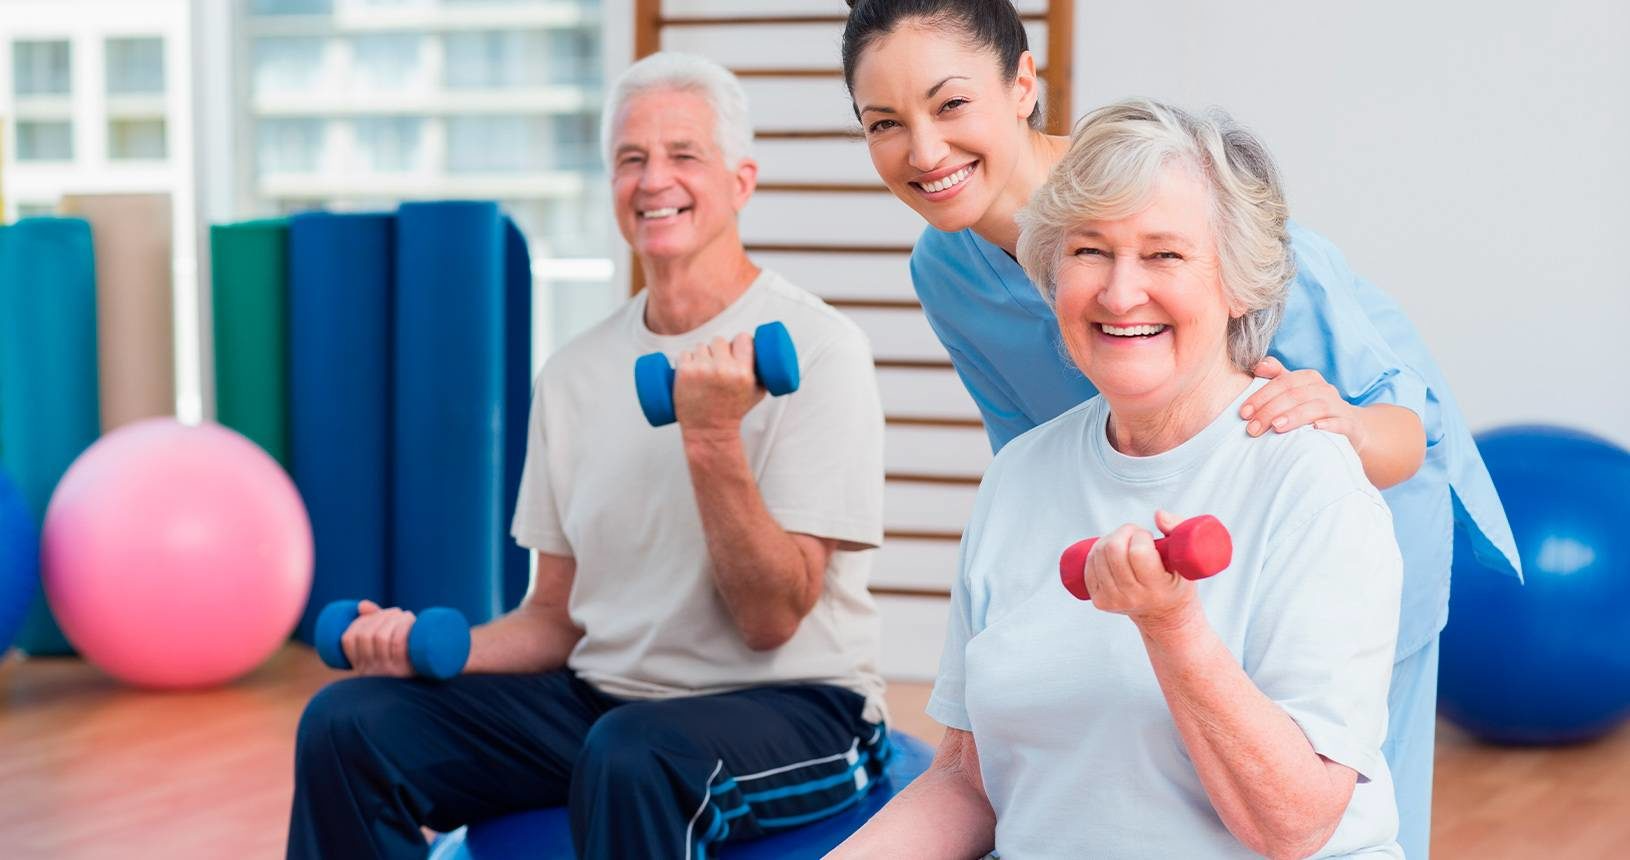 3 Incredible Ways Physical Therapy Can Improve Your Health